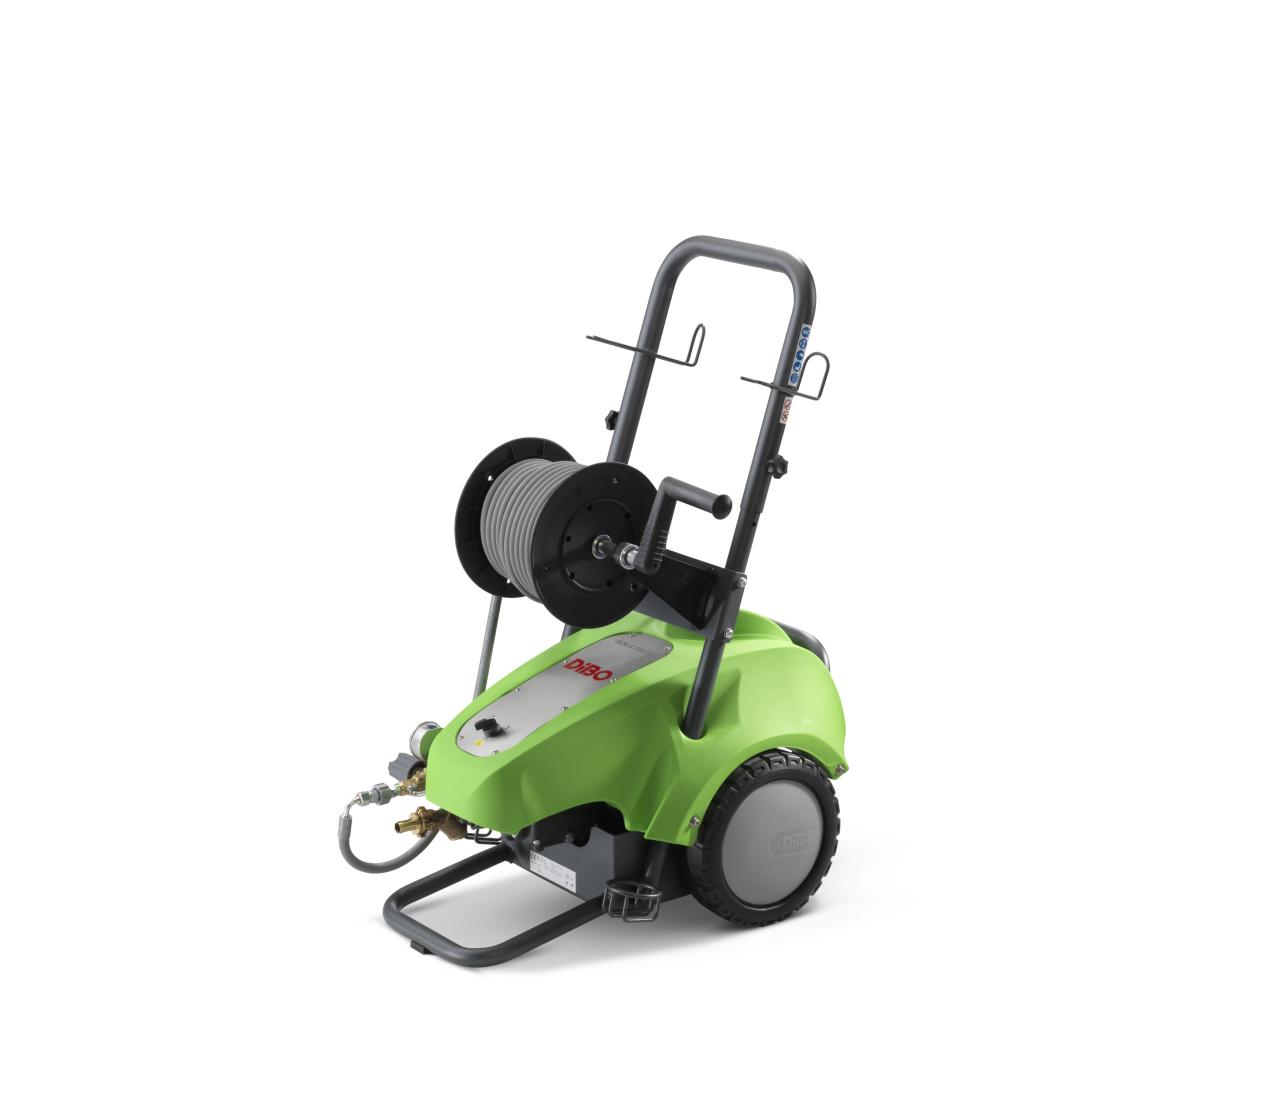 Cold water high pressure cleaner with hose reel - DiBO ECN-S